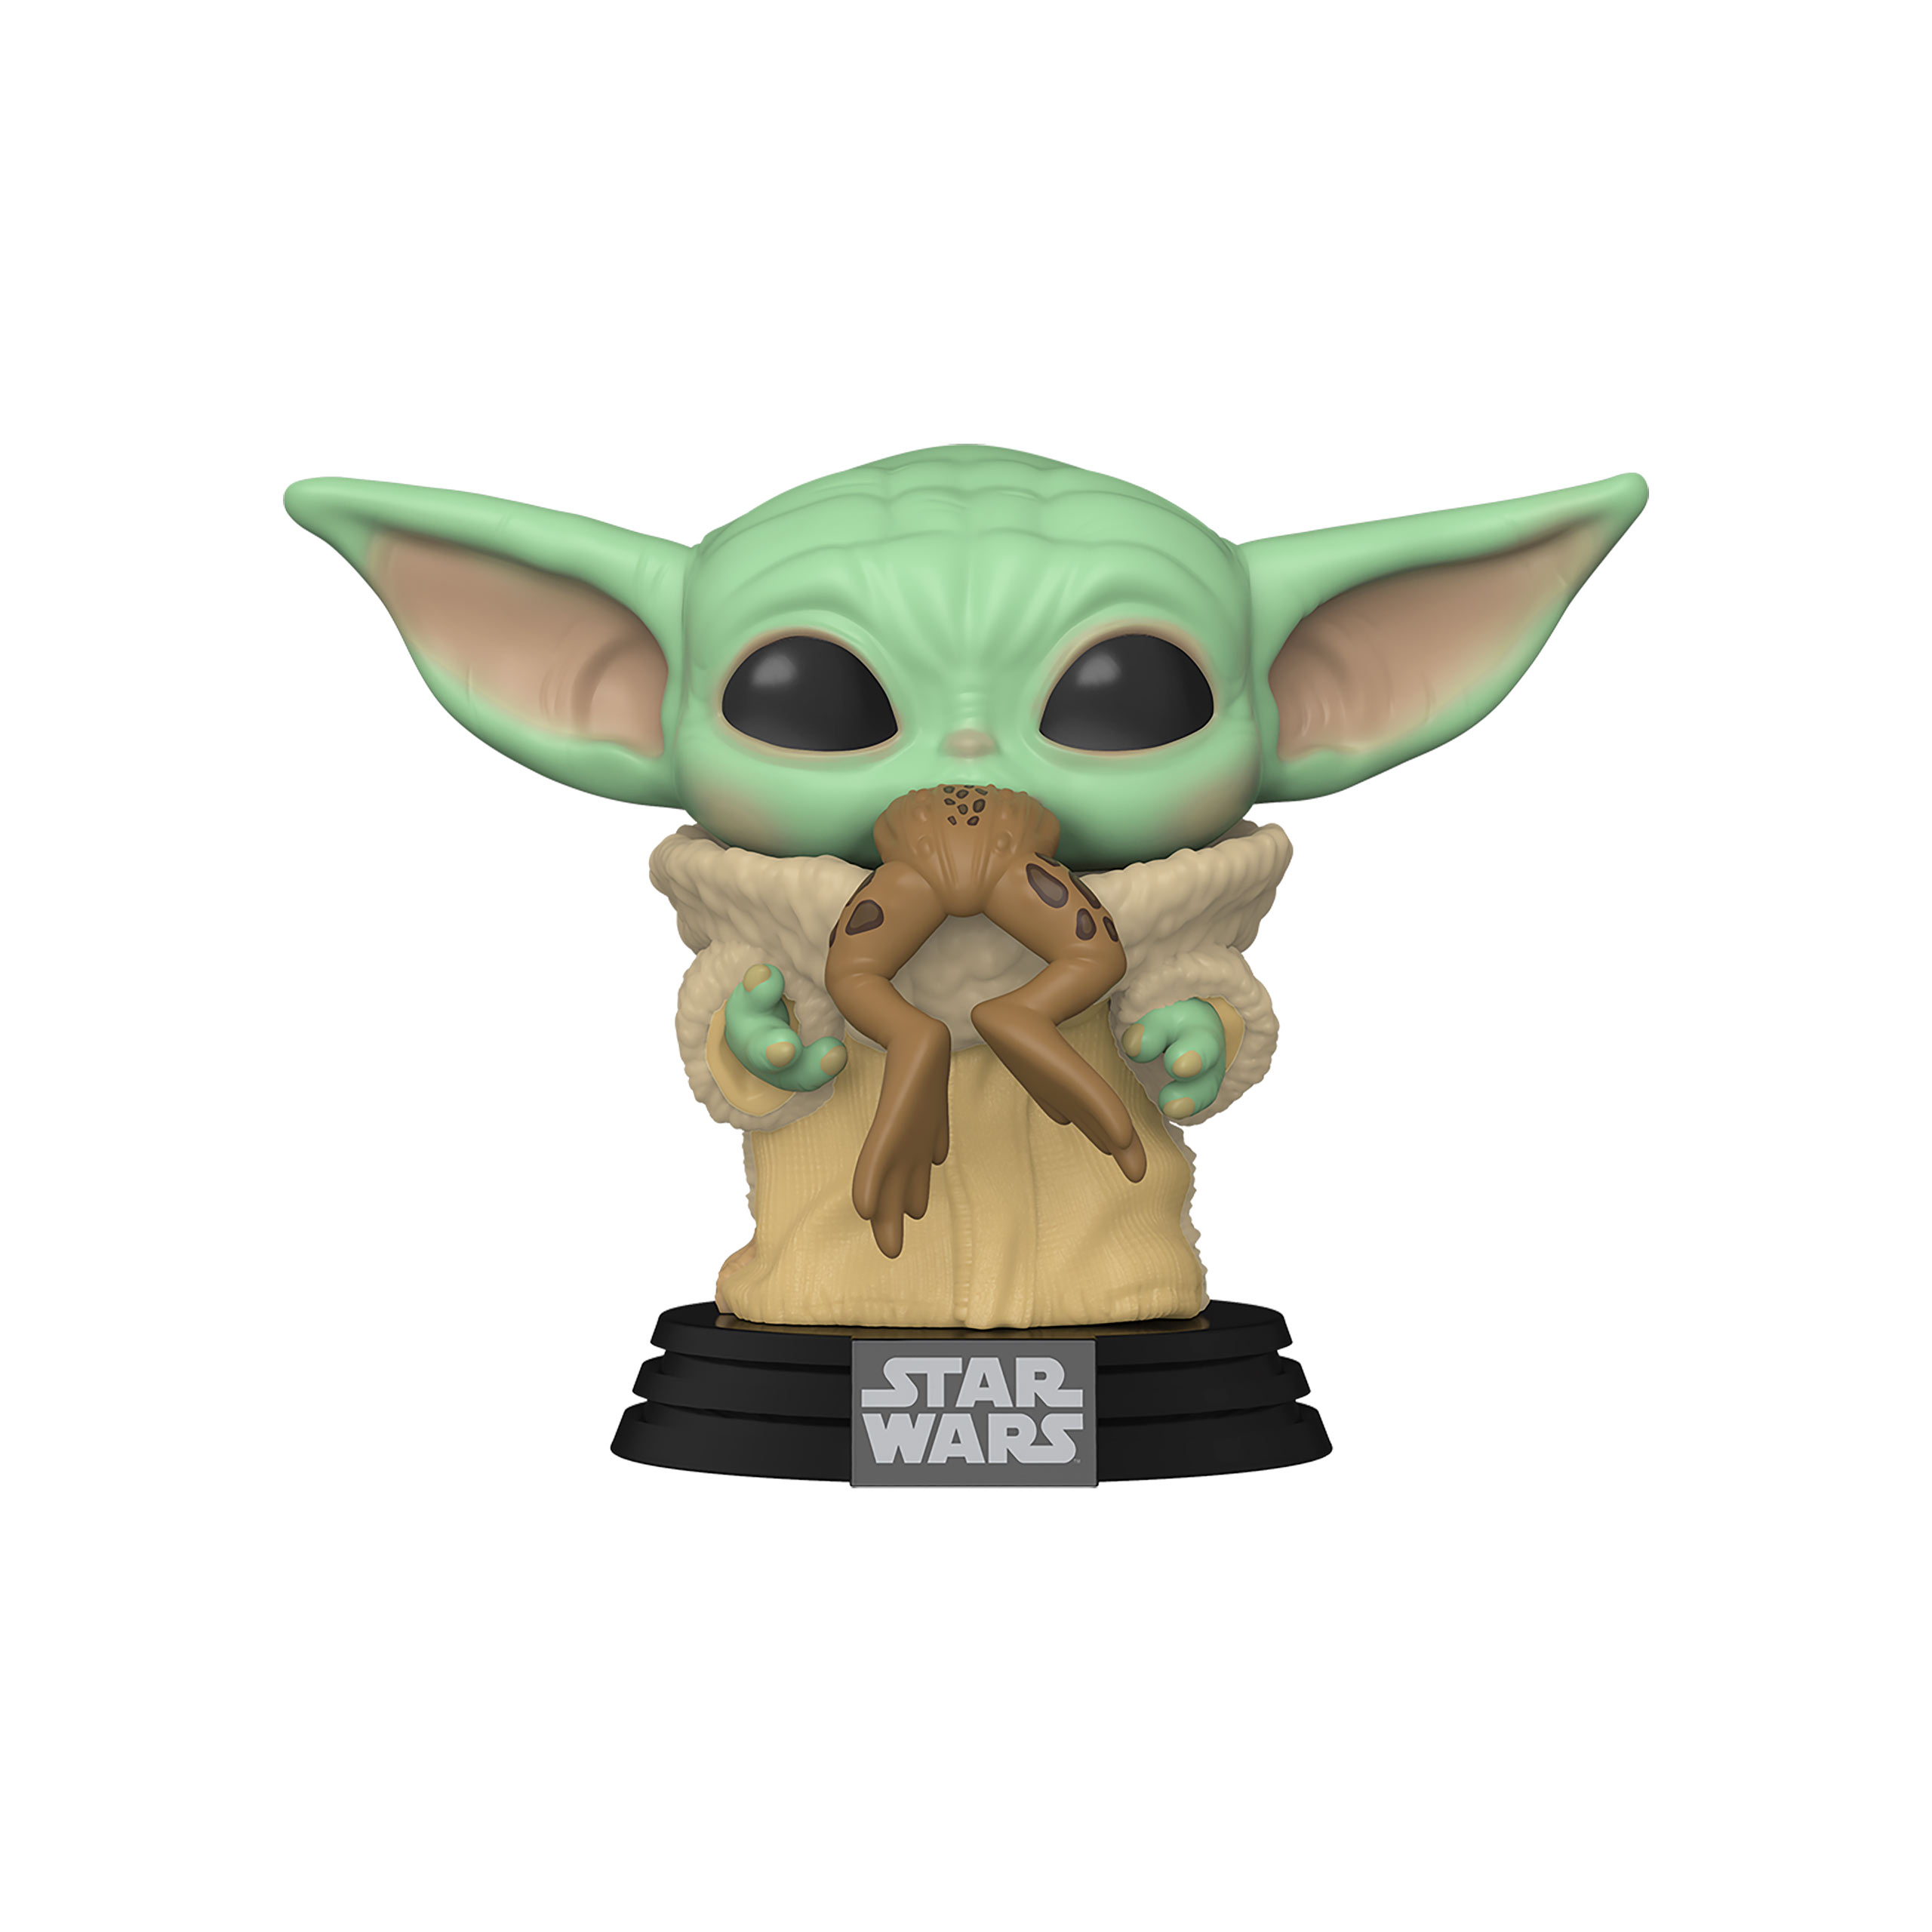 The Child with Frog Funko Pop bobblehead figure - Star Wars The Mandalorian